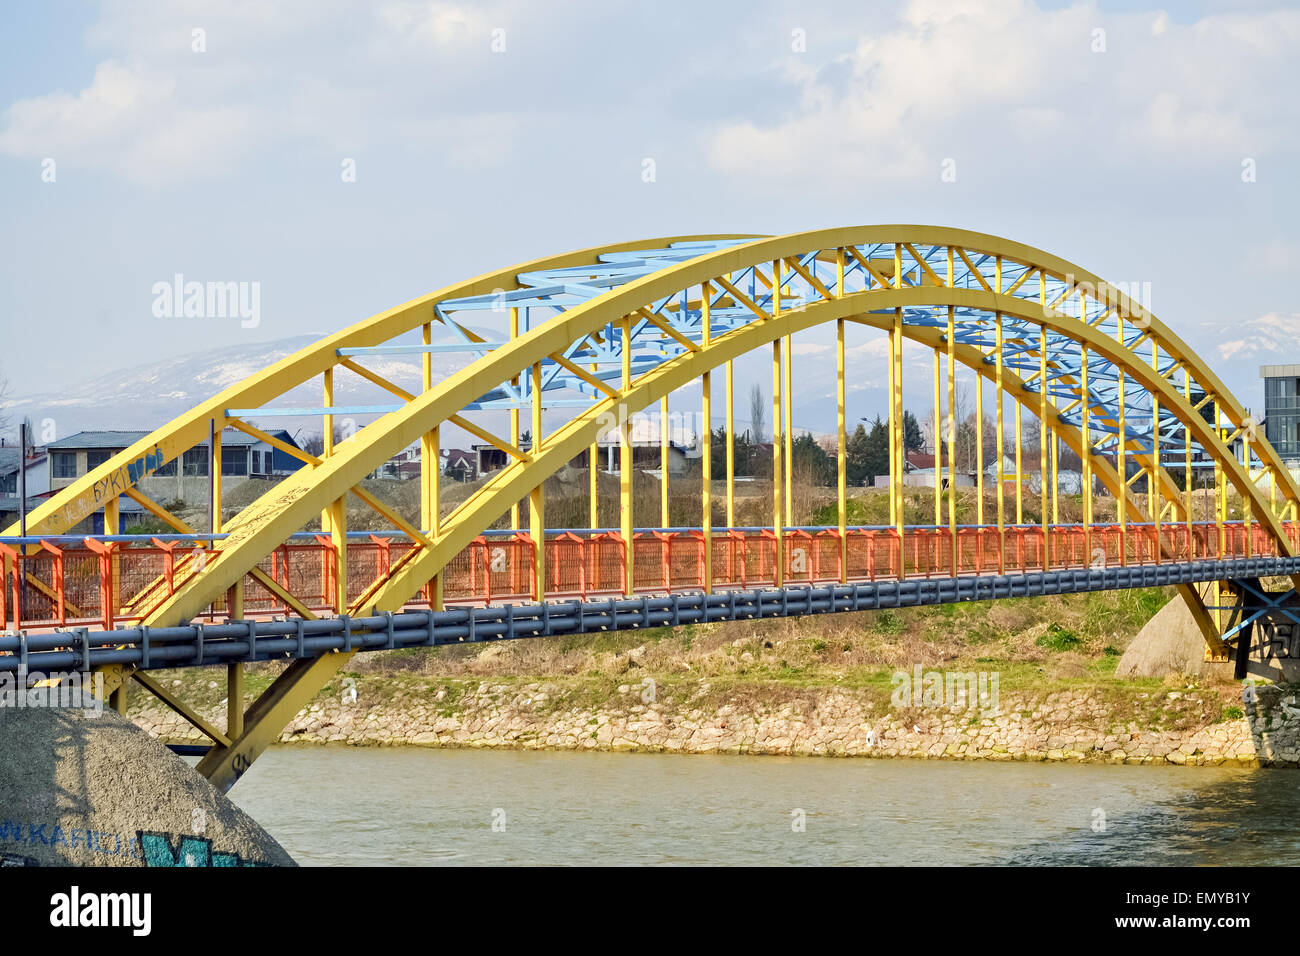 Colorful steel bridge for pedestrians over a small river Stock Photo